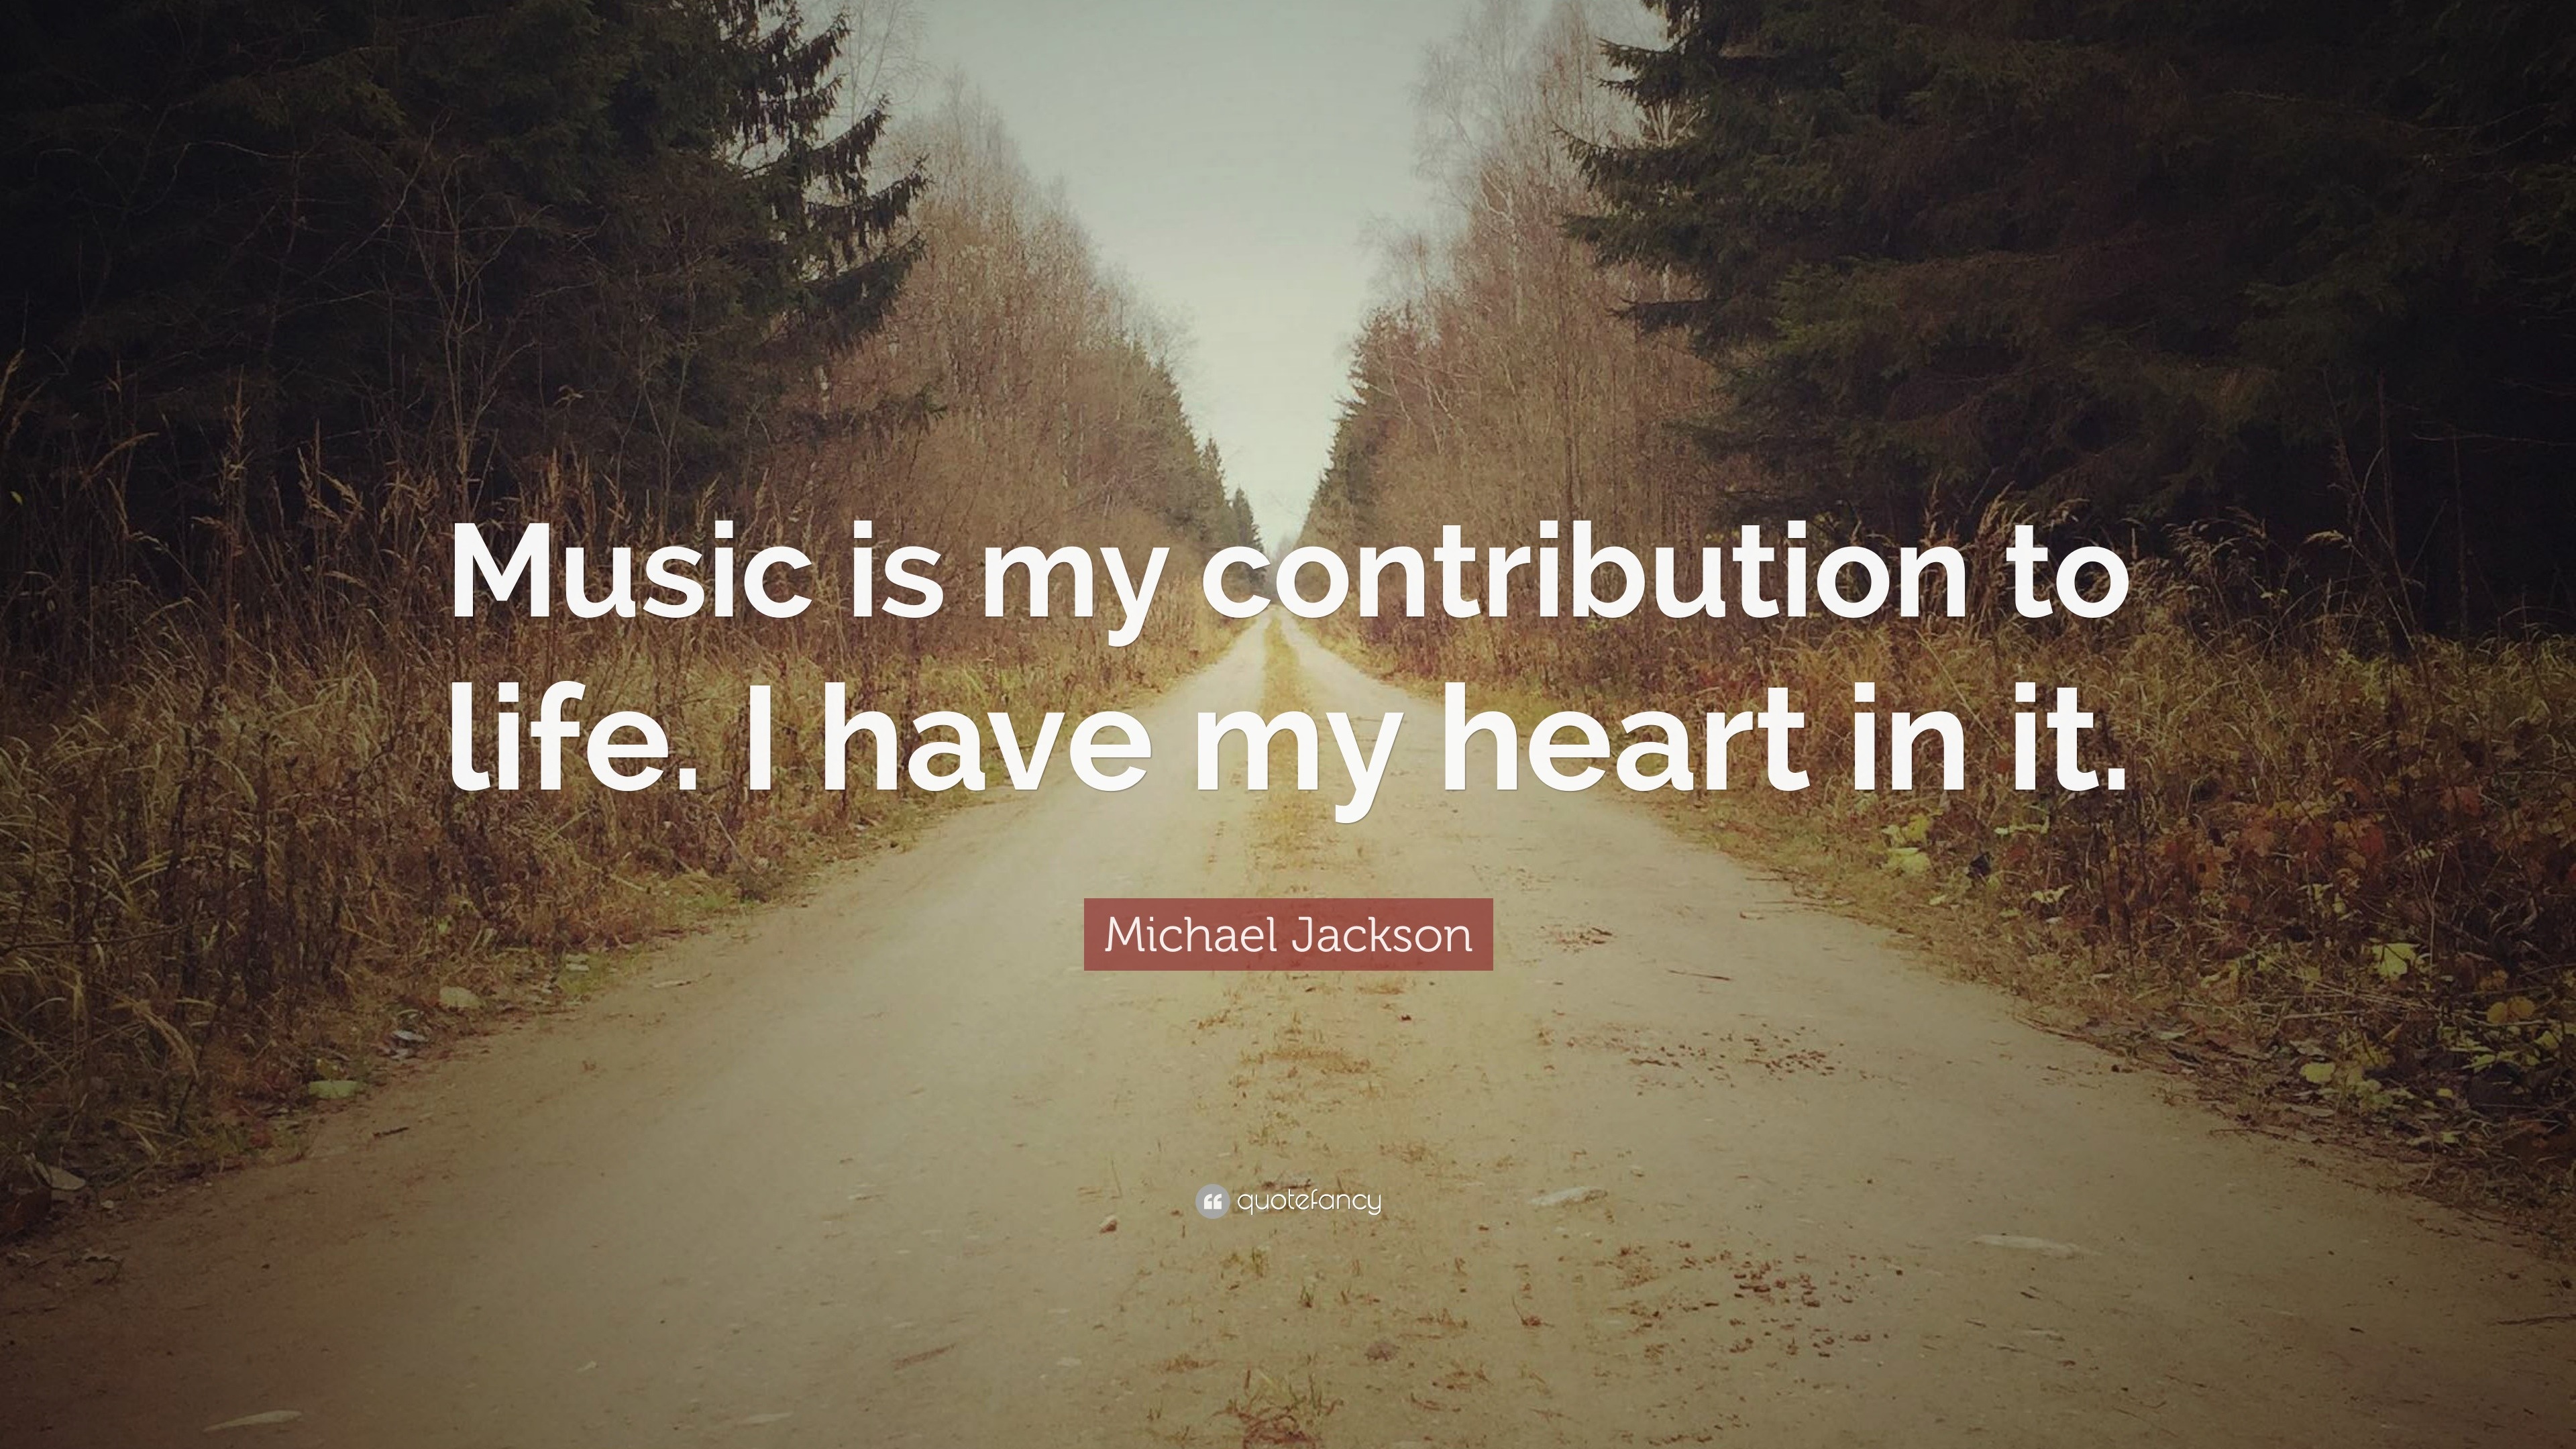 Michael Jackson Quote: “Music is my contribution to life. I have my